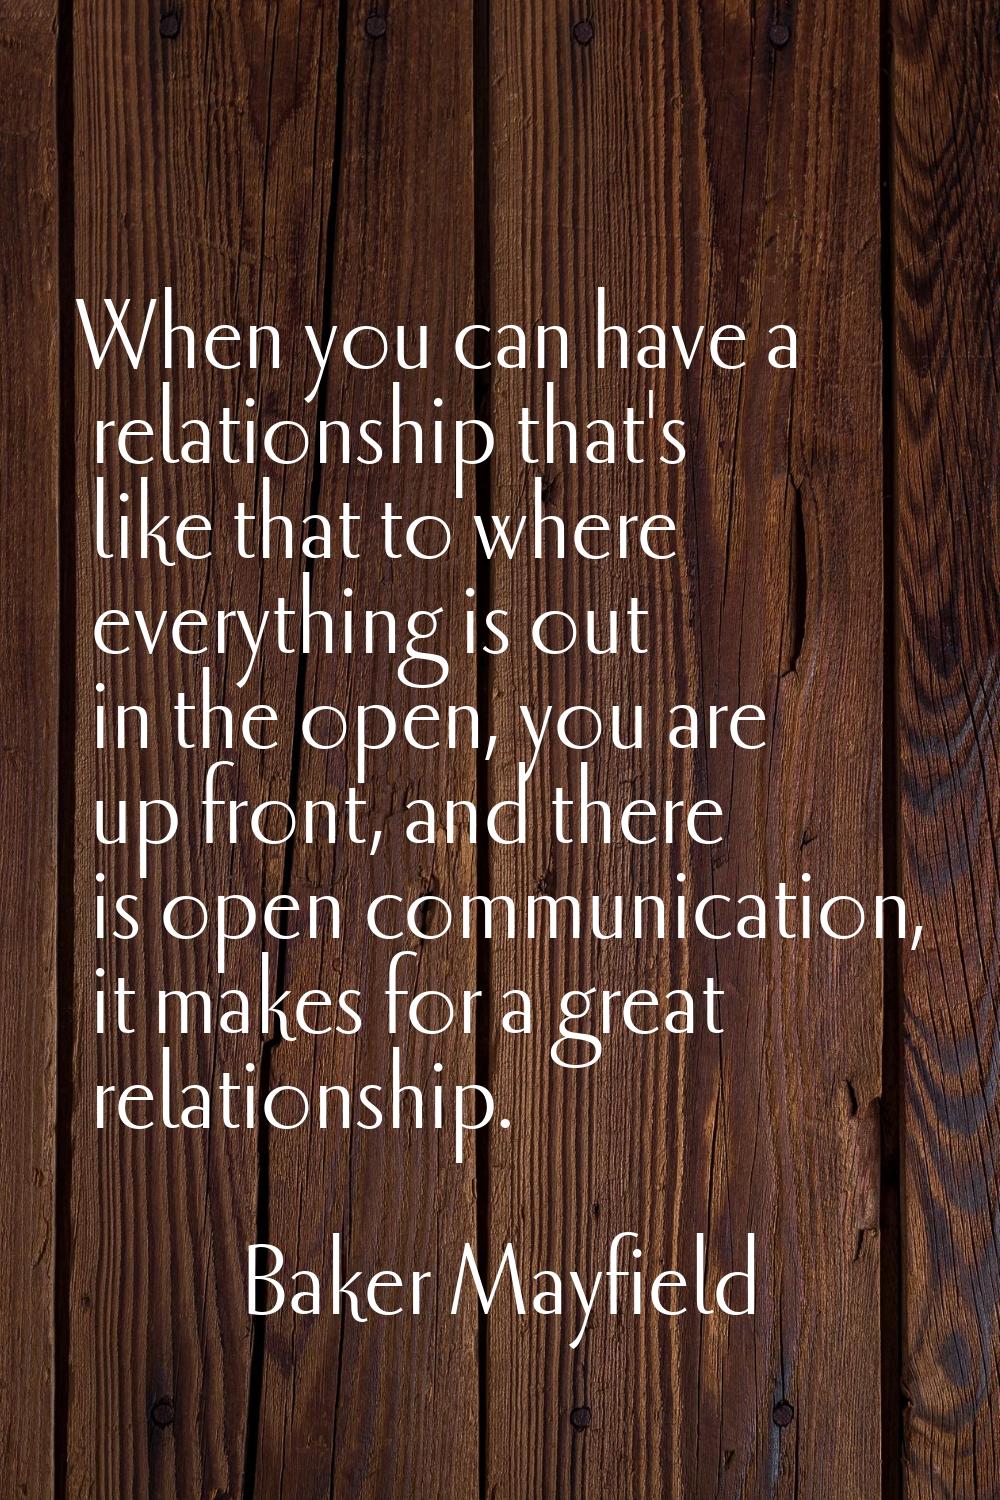 When you can have a relationship that's like that to where everything is out in the open, you are u